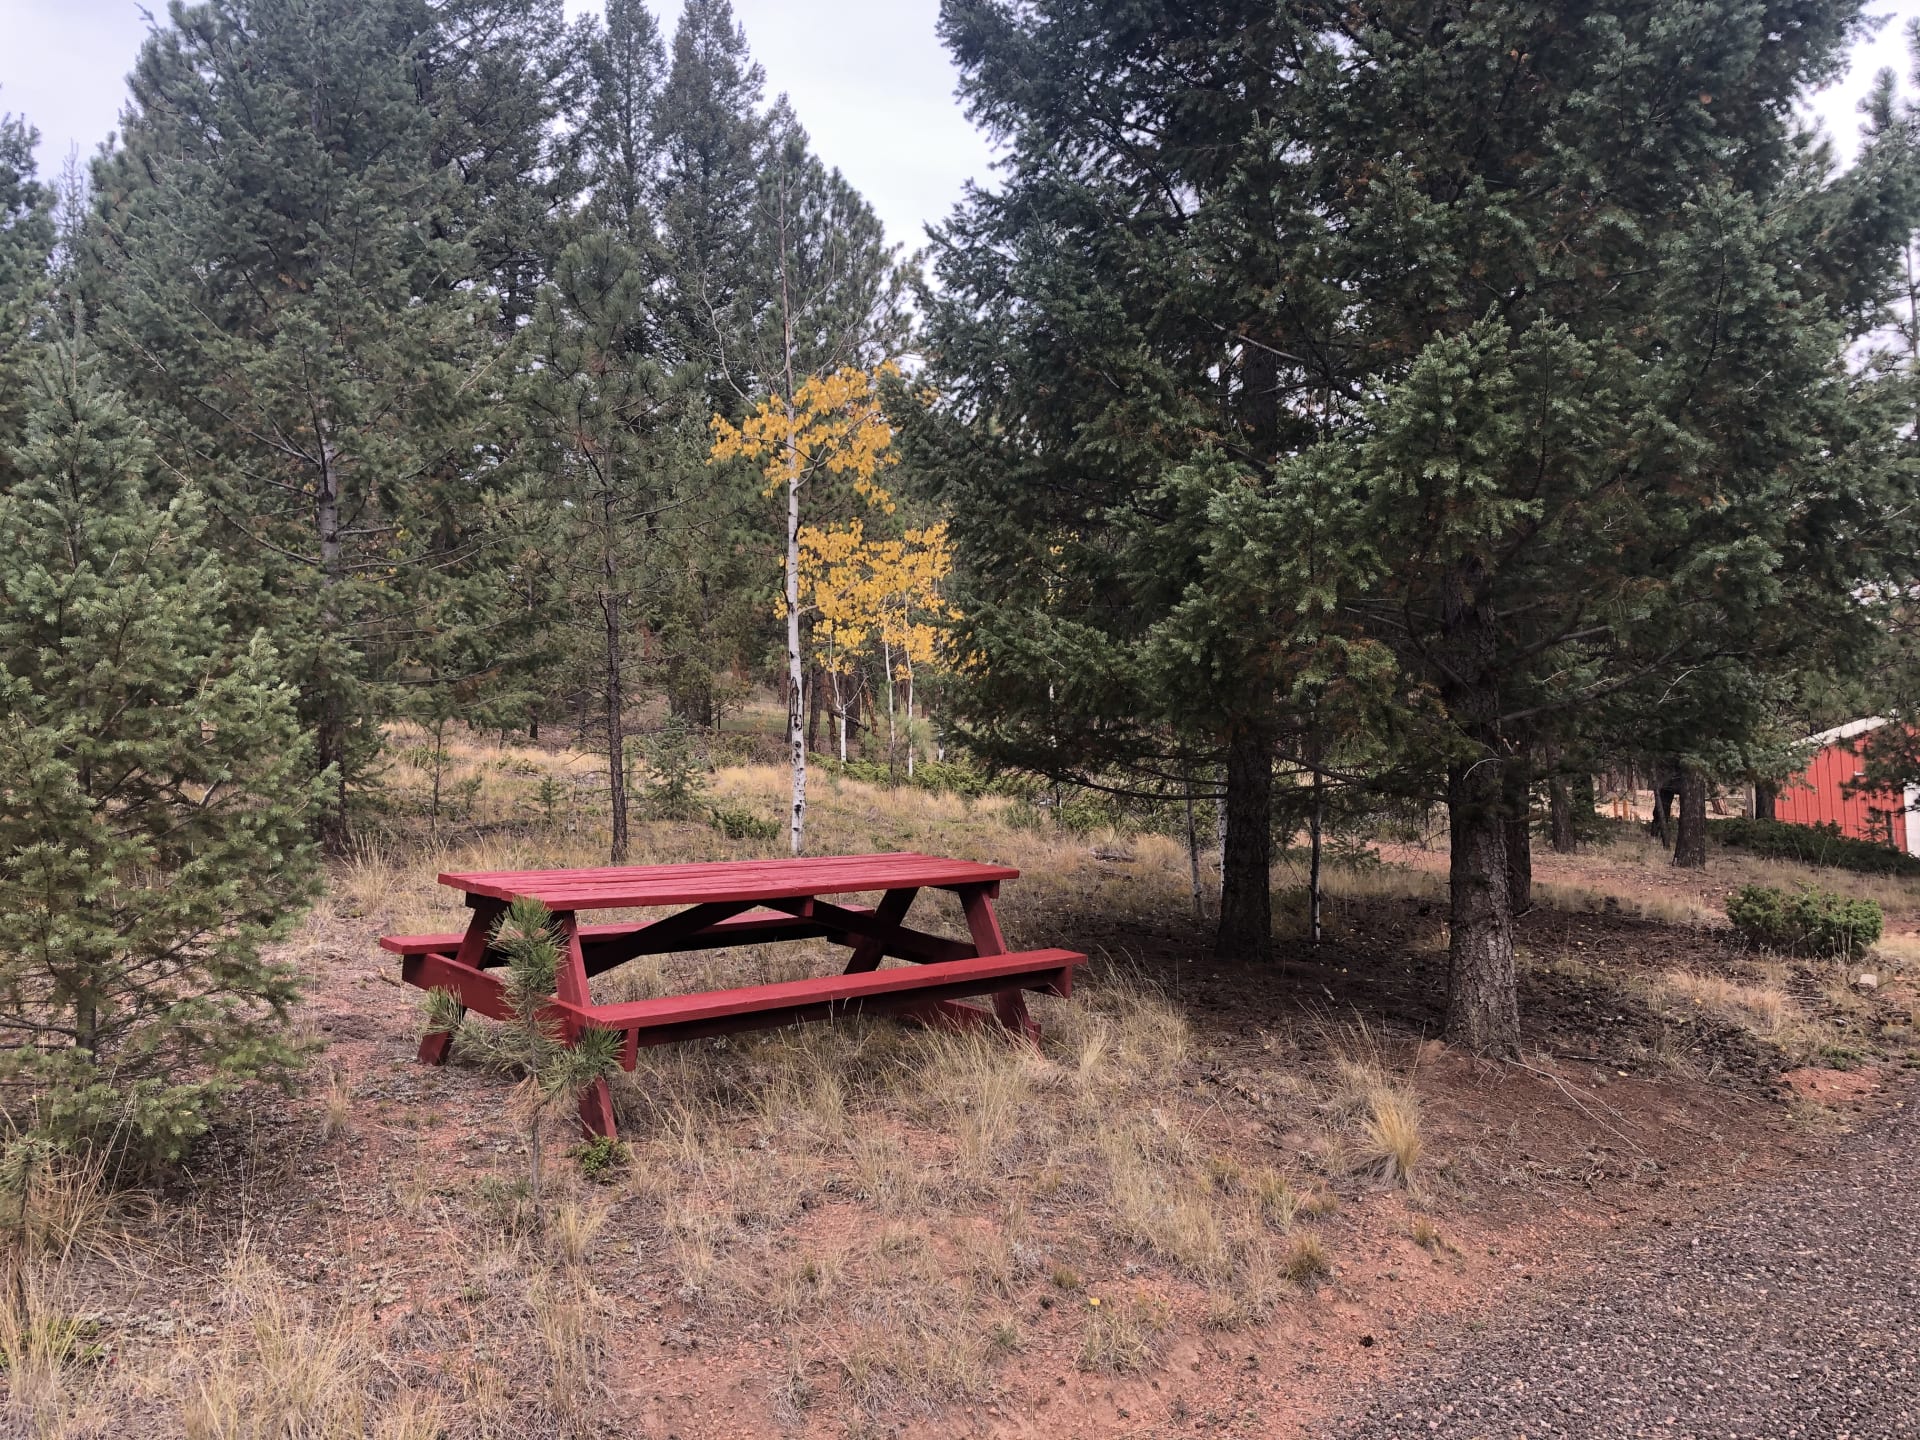 Picnic table at campsite.